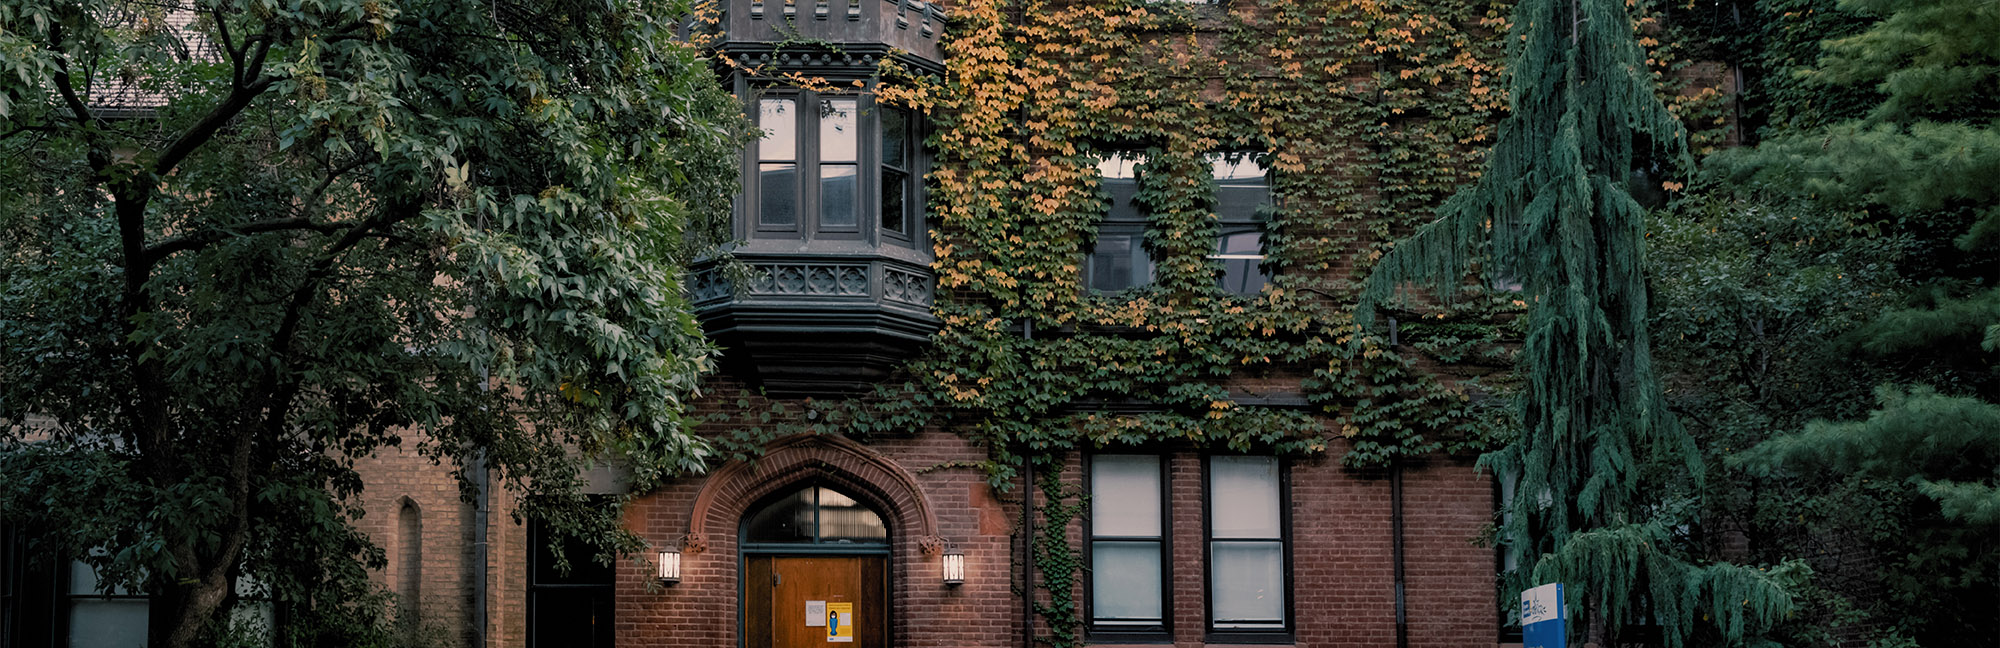 Ivy-covered brick building on TMU campus.